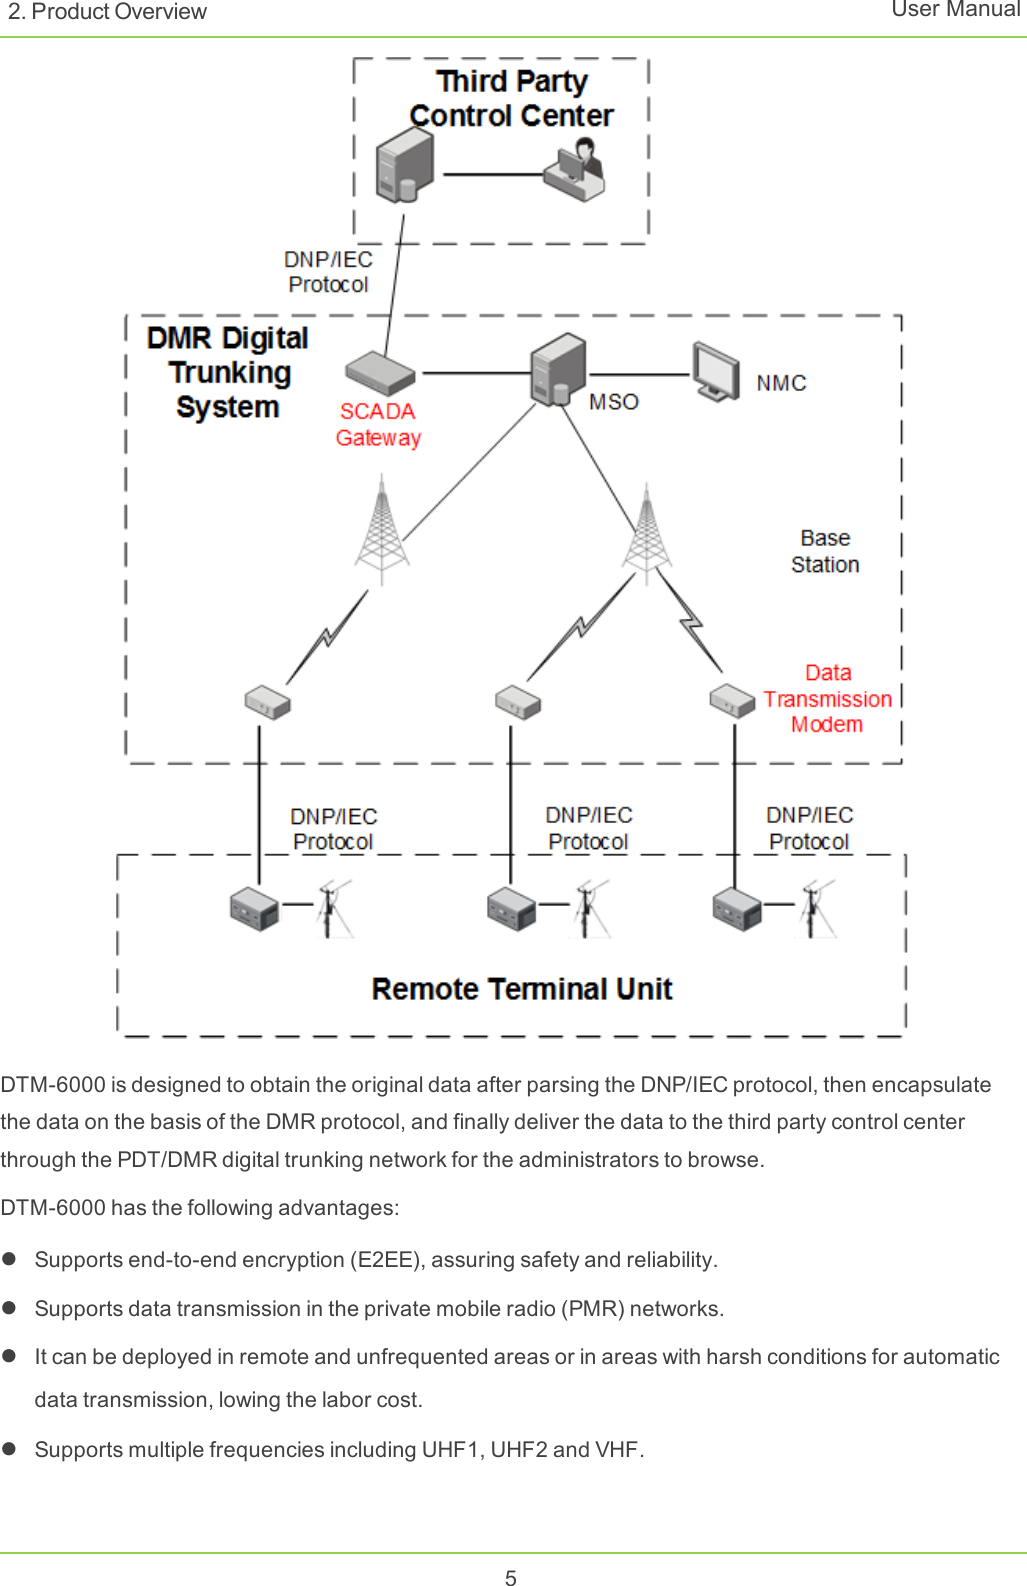 DTM-6000 is designed to obtain the original data after parsing the DNP/IEC protocol, then encapsulatethe data on the basis of the DMR protocol, and finally deliver the data to the third party control centerthrough the PDT/DMR digital trunking network for the administrators to browse.DTM-6000 has the following advantages:lSupports end-to-end encryption (E2EE), assuring safety and reliability.lSupports data transmission in the private mobile radio (PMR) networks.lIt can be deployed in remote and unfrequented areas or in areas with harsh conditions for automaticdata transmission, lowing the labor cost.lSupports multiple frequencies including UHF1, UHF2 and VHF.52. Product Overview User Manual